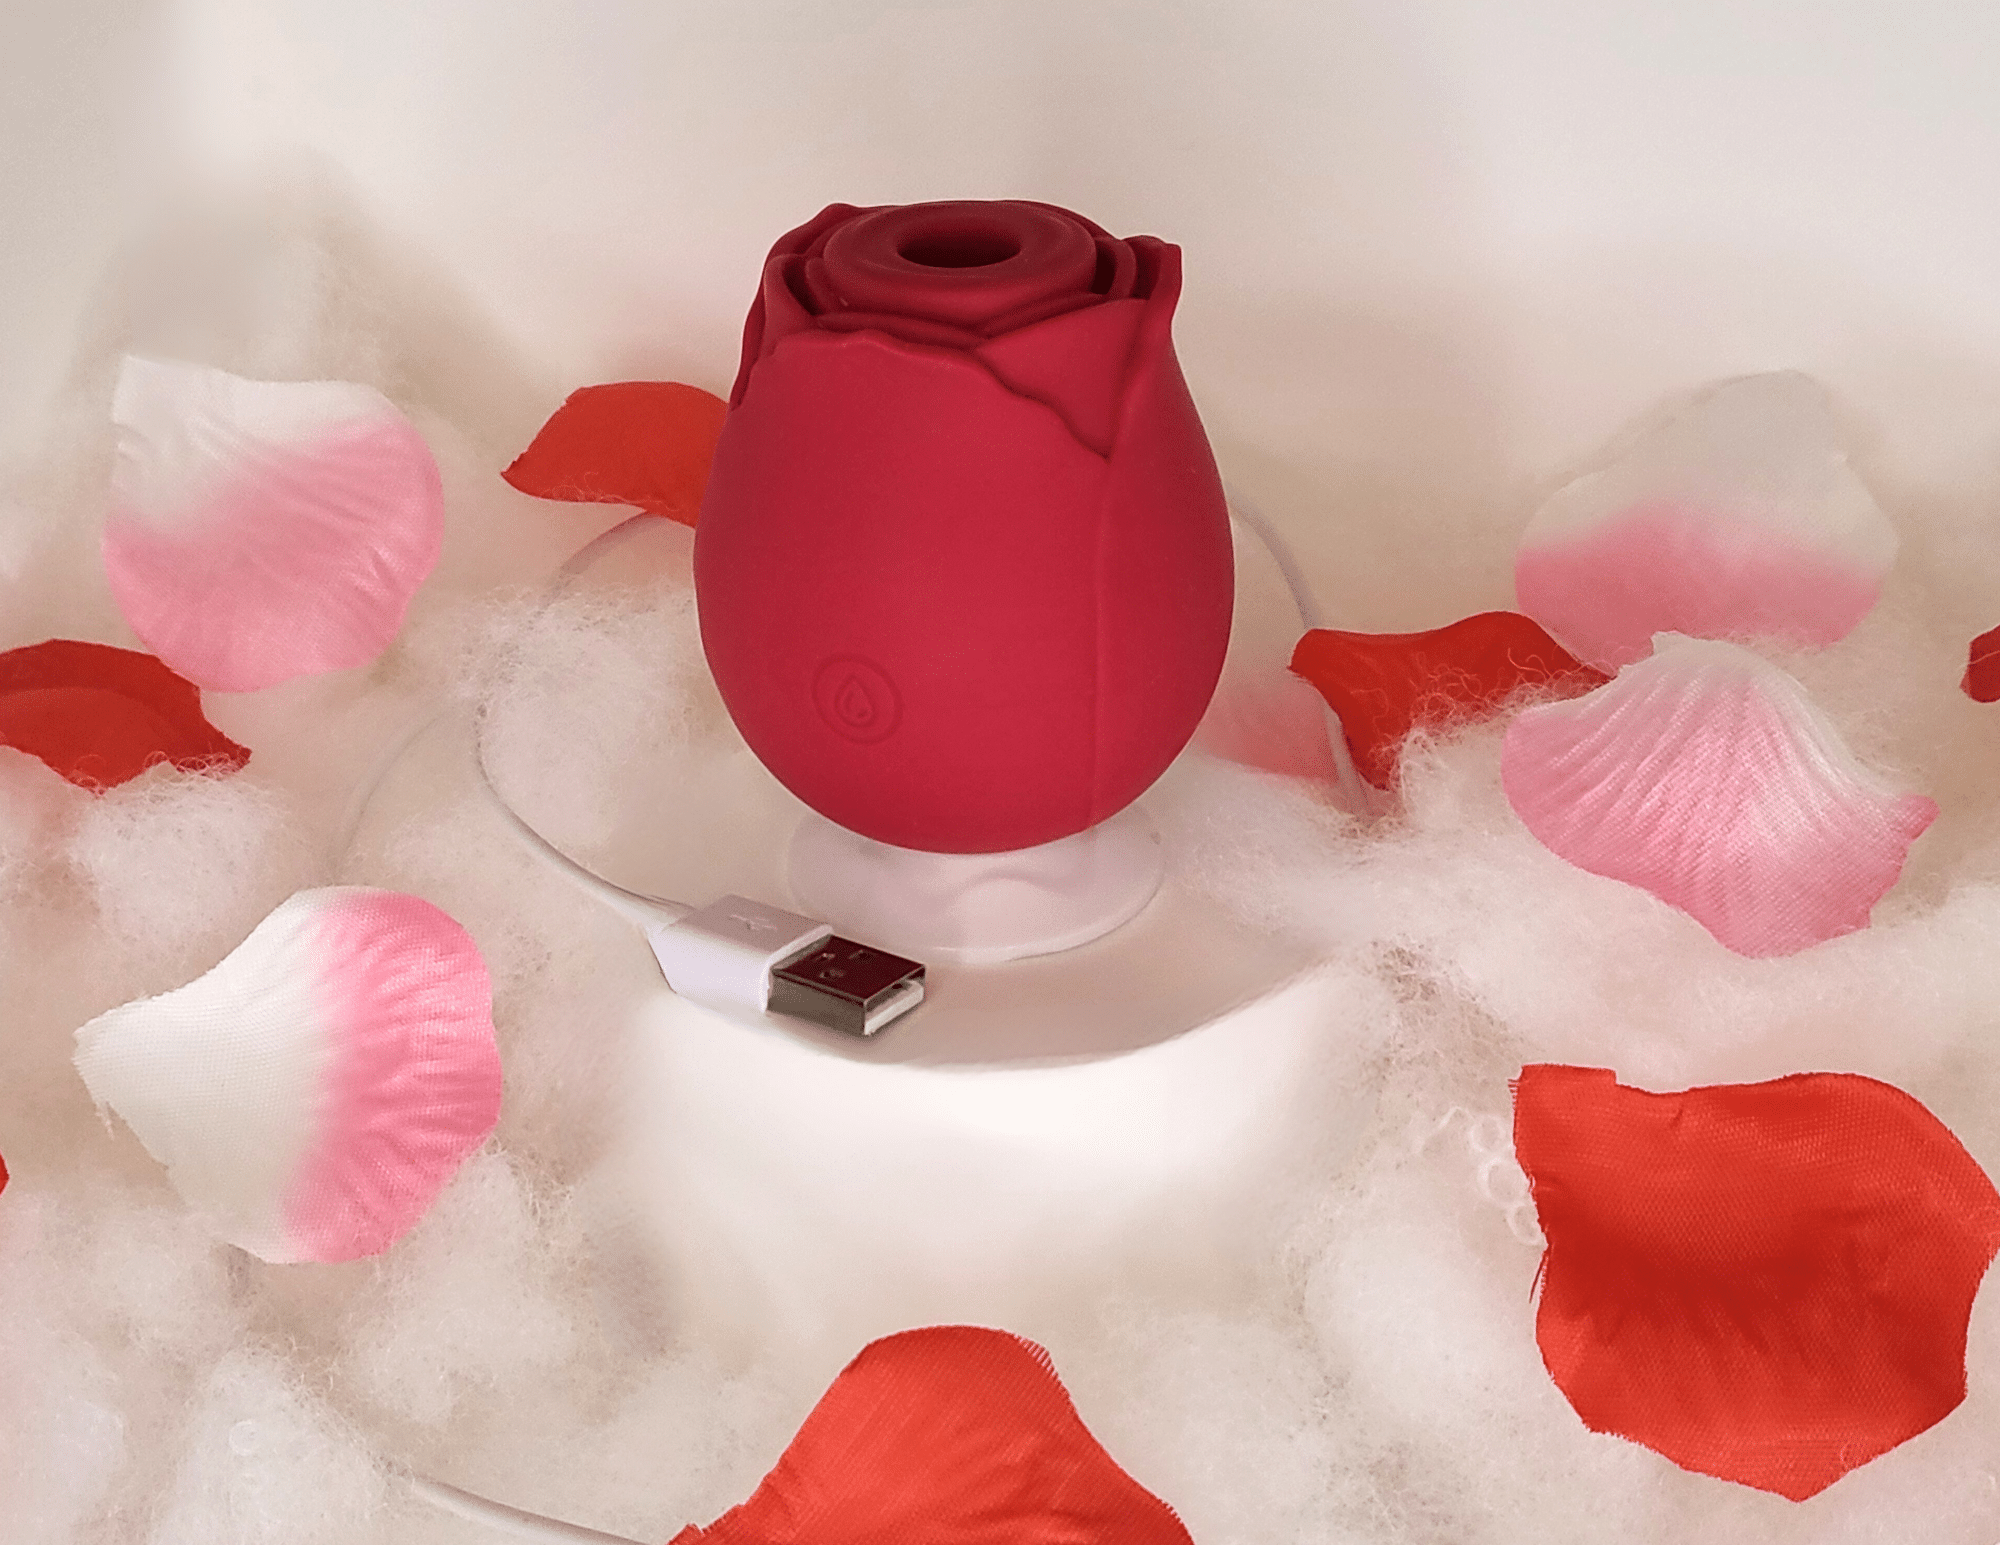 Inya The Rose Rechargeable Suction Vibe The Inya The Rose Rechargeable Suction Vibe’s design